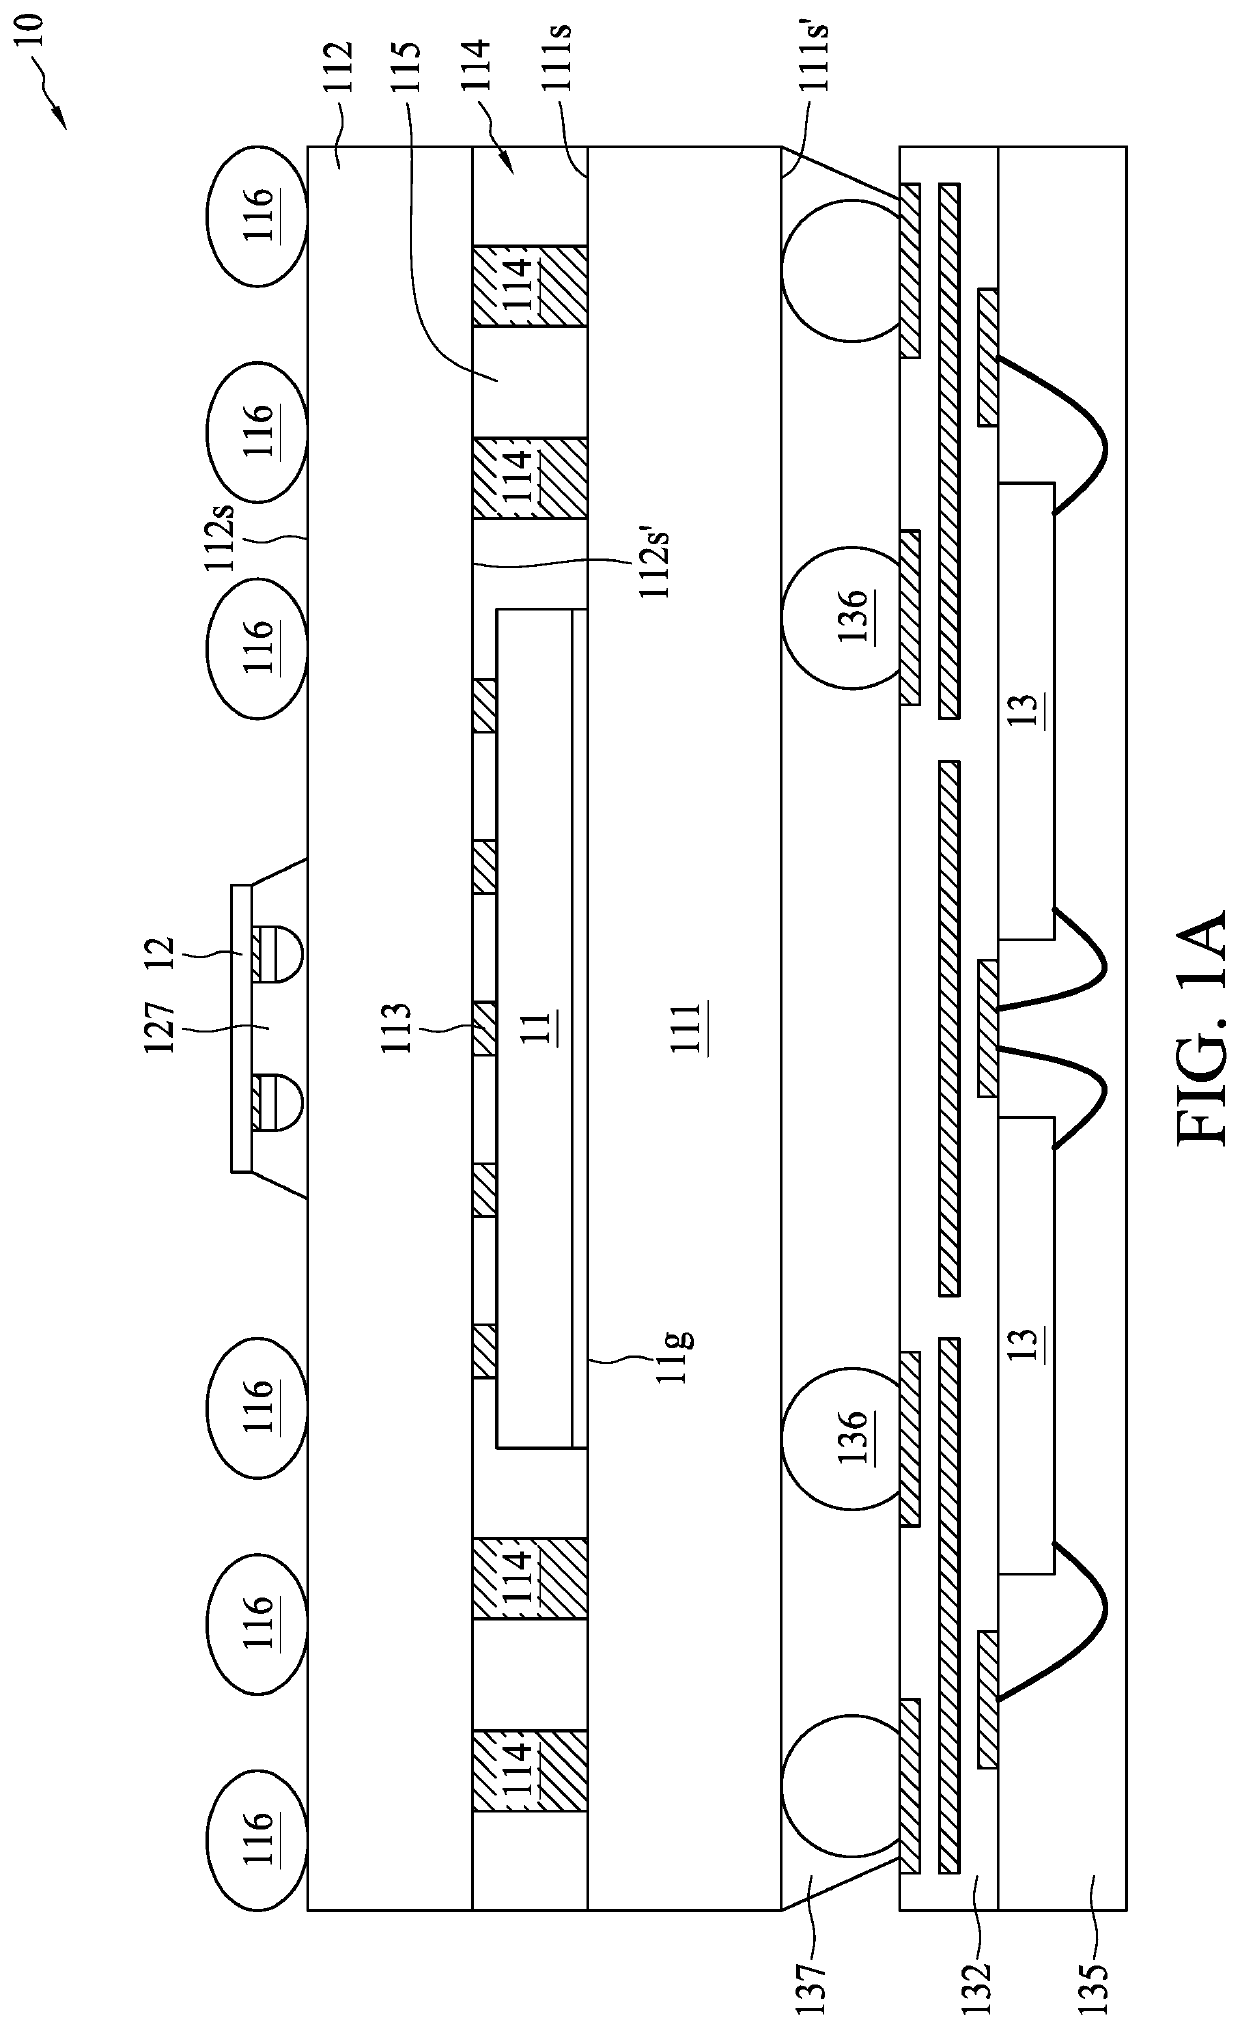 Semiconductor device package